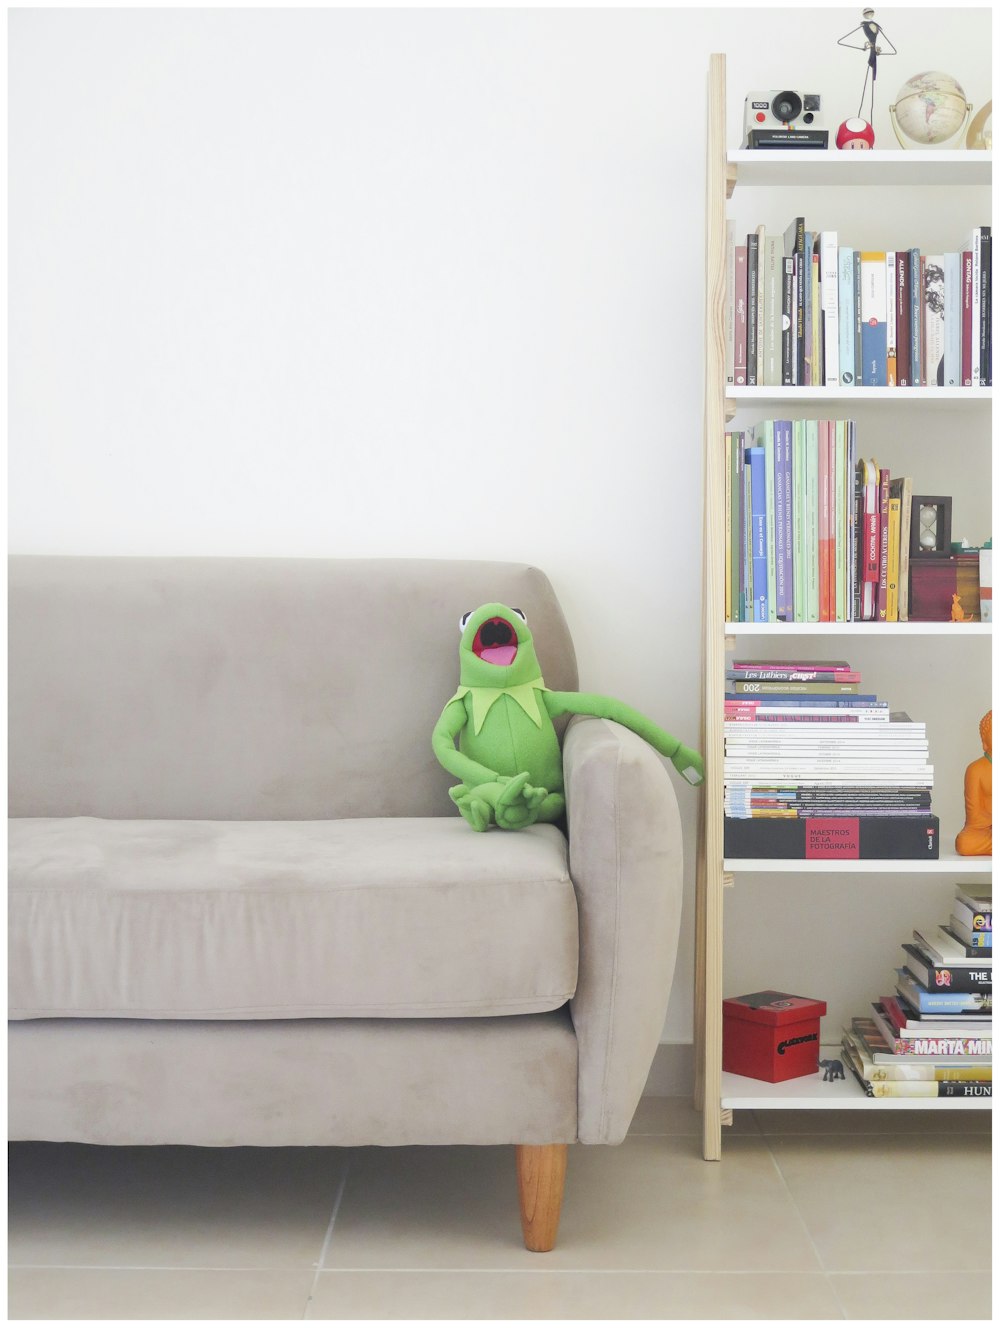 The Muppets Kermit plush toy on gray sofa